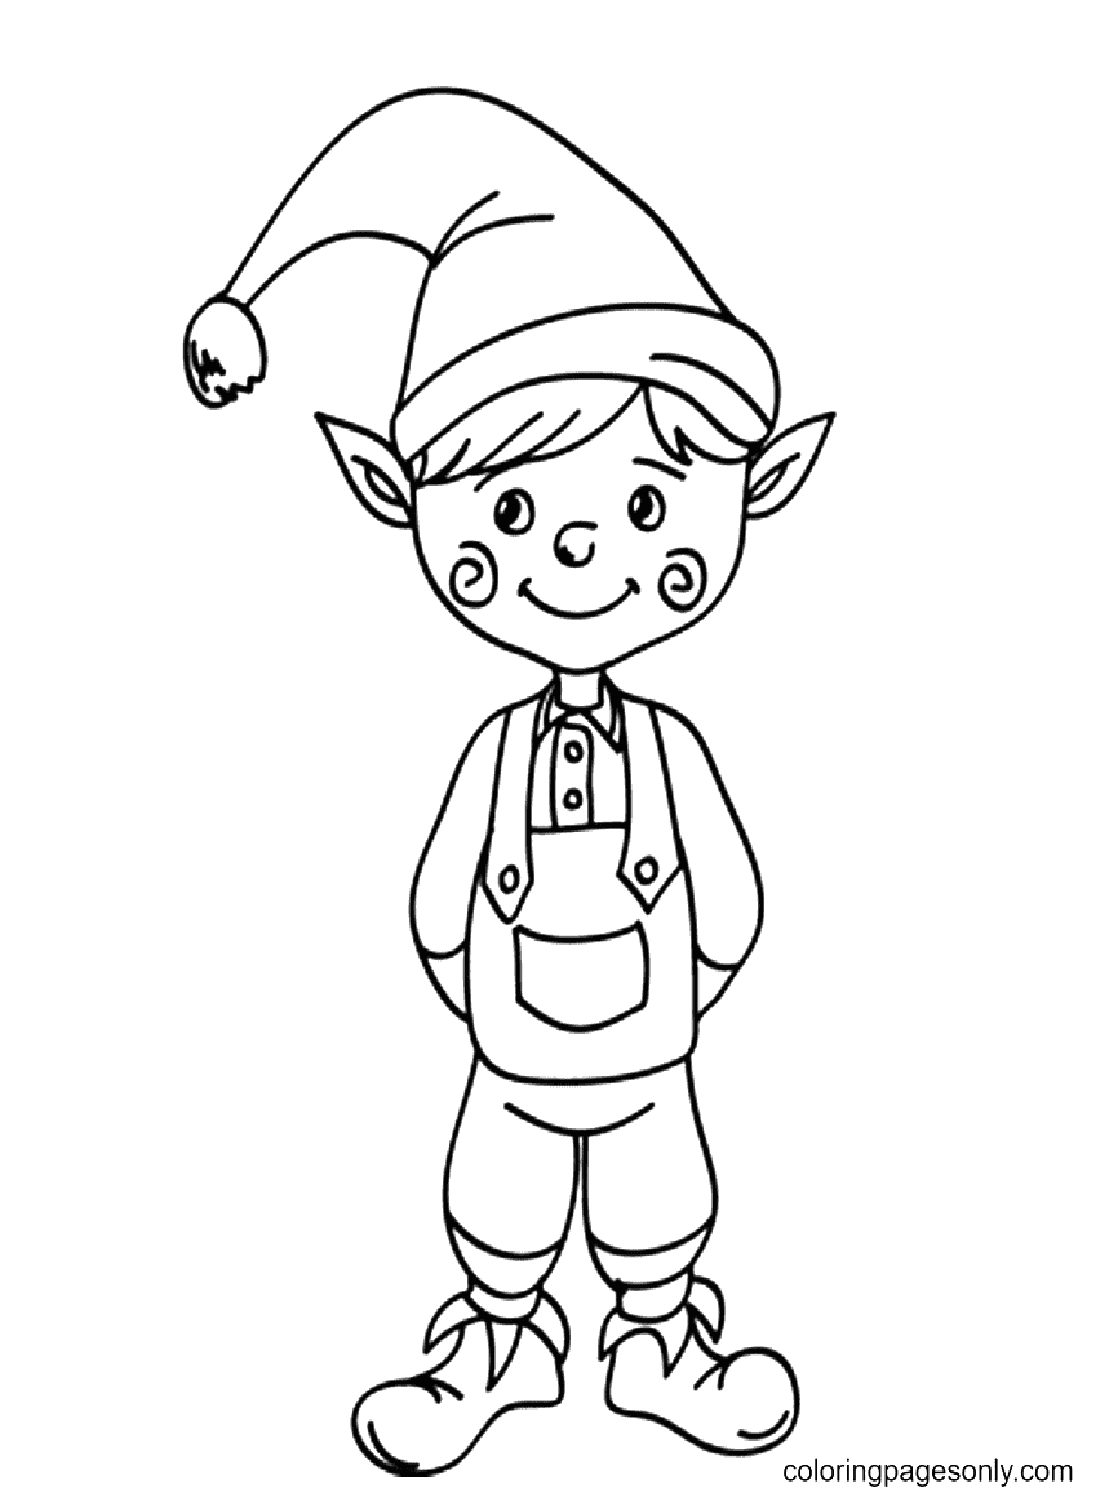 Cute Elf Smiling Coloring Page - Free Printable Coloring Pages